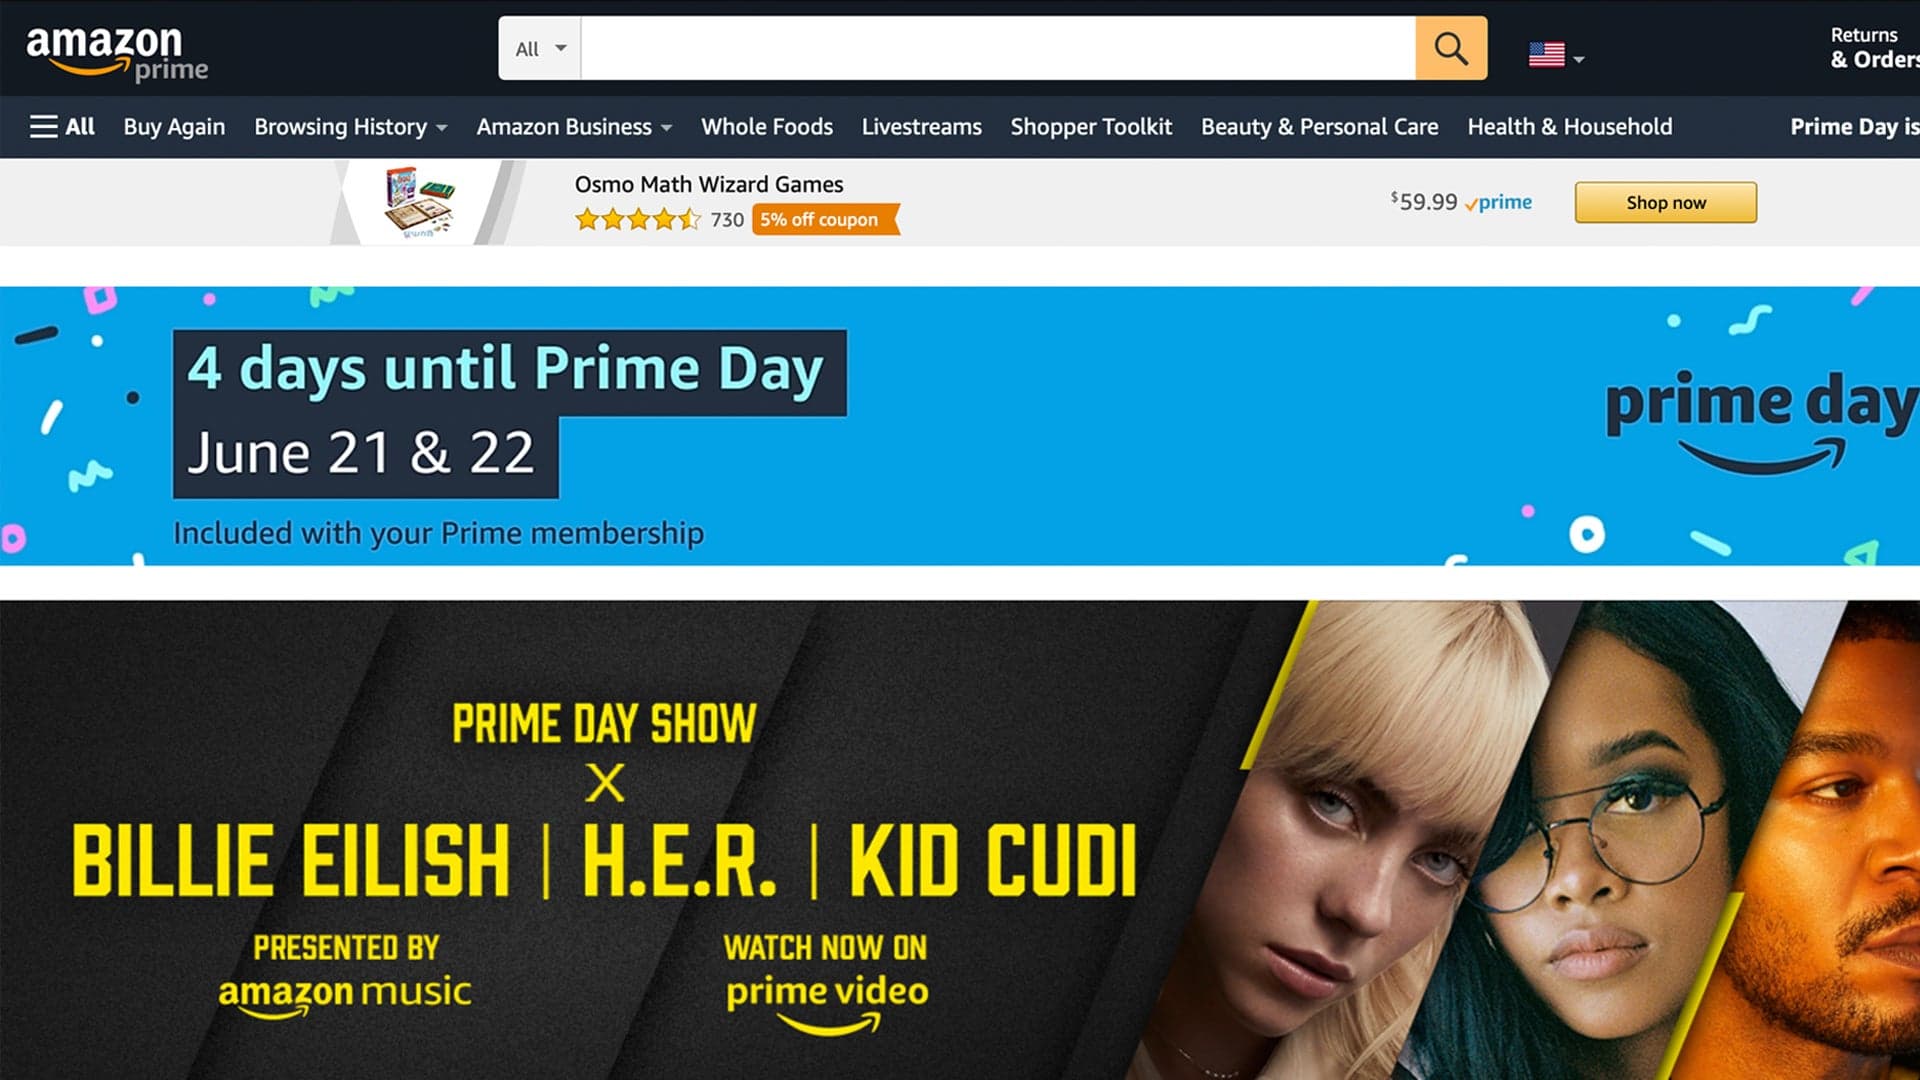 Here’s How to Tell If Your Prime Day “Deal” Is Really A Deal